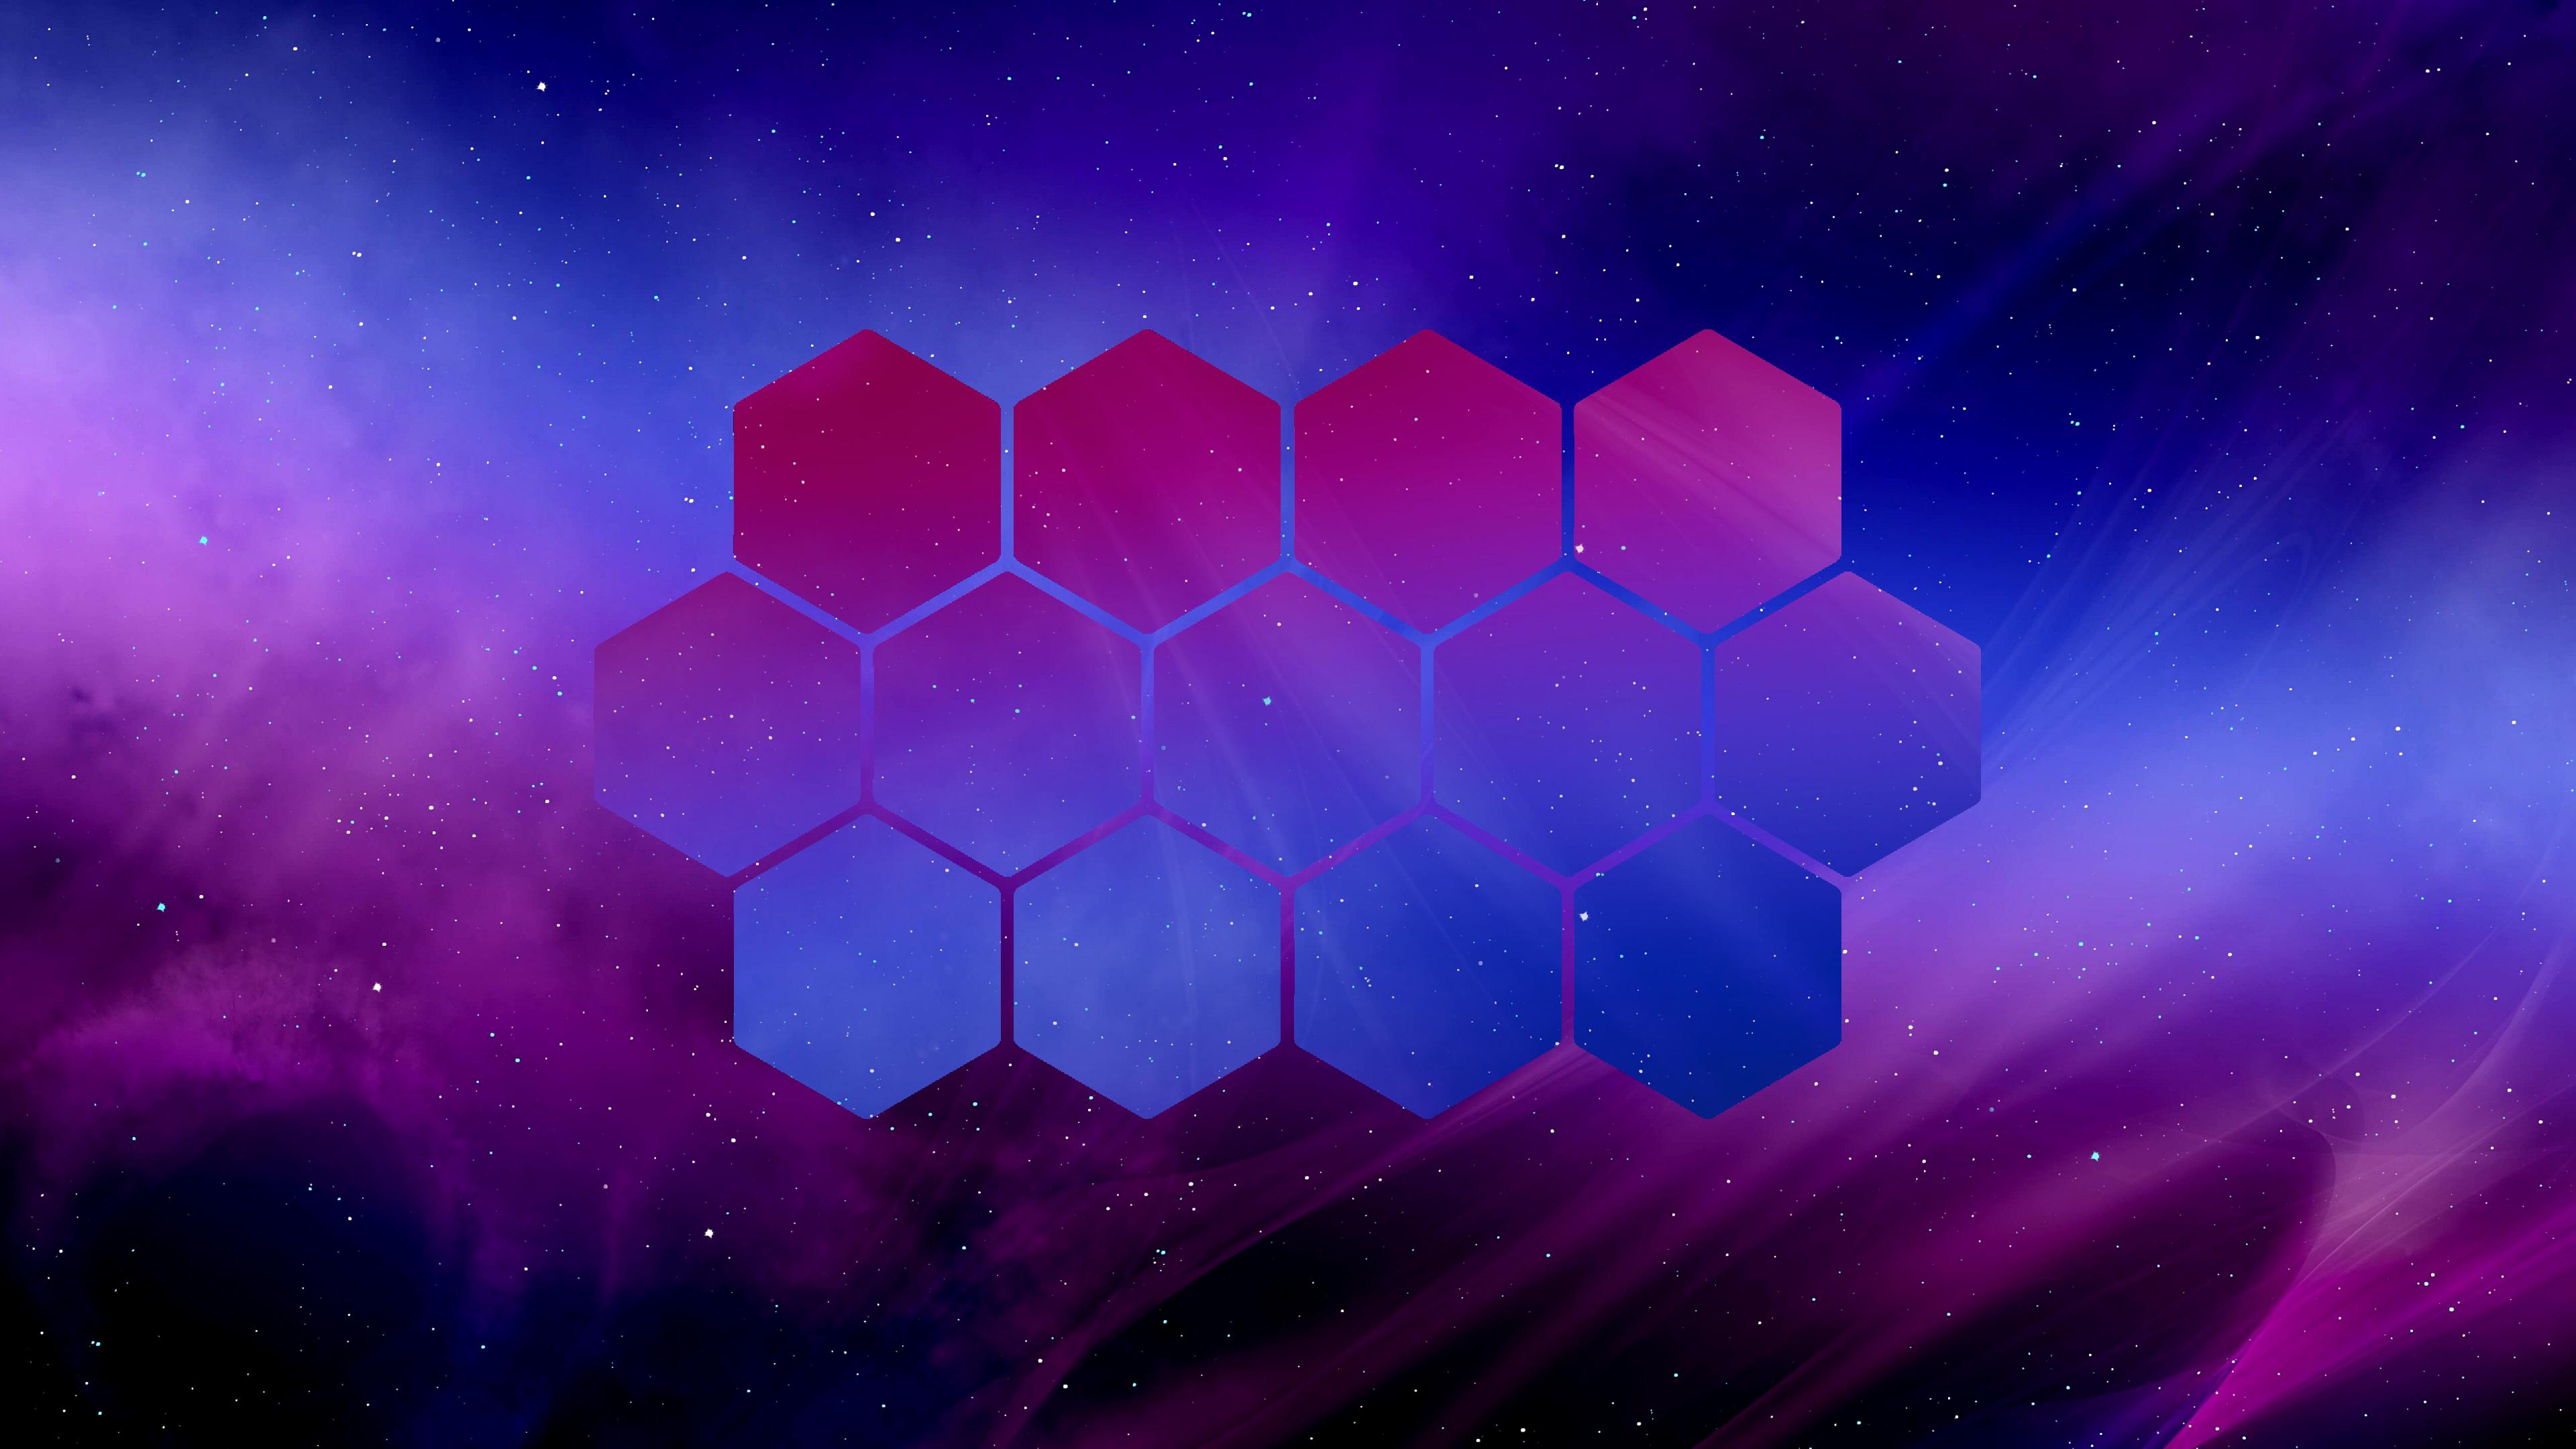 I made a low key bi flag wallpapers and I thought you guys might